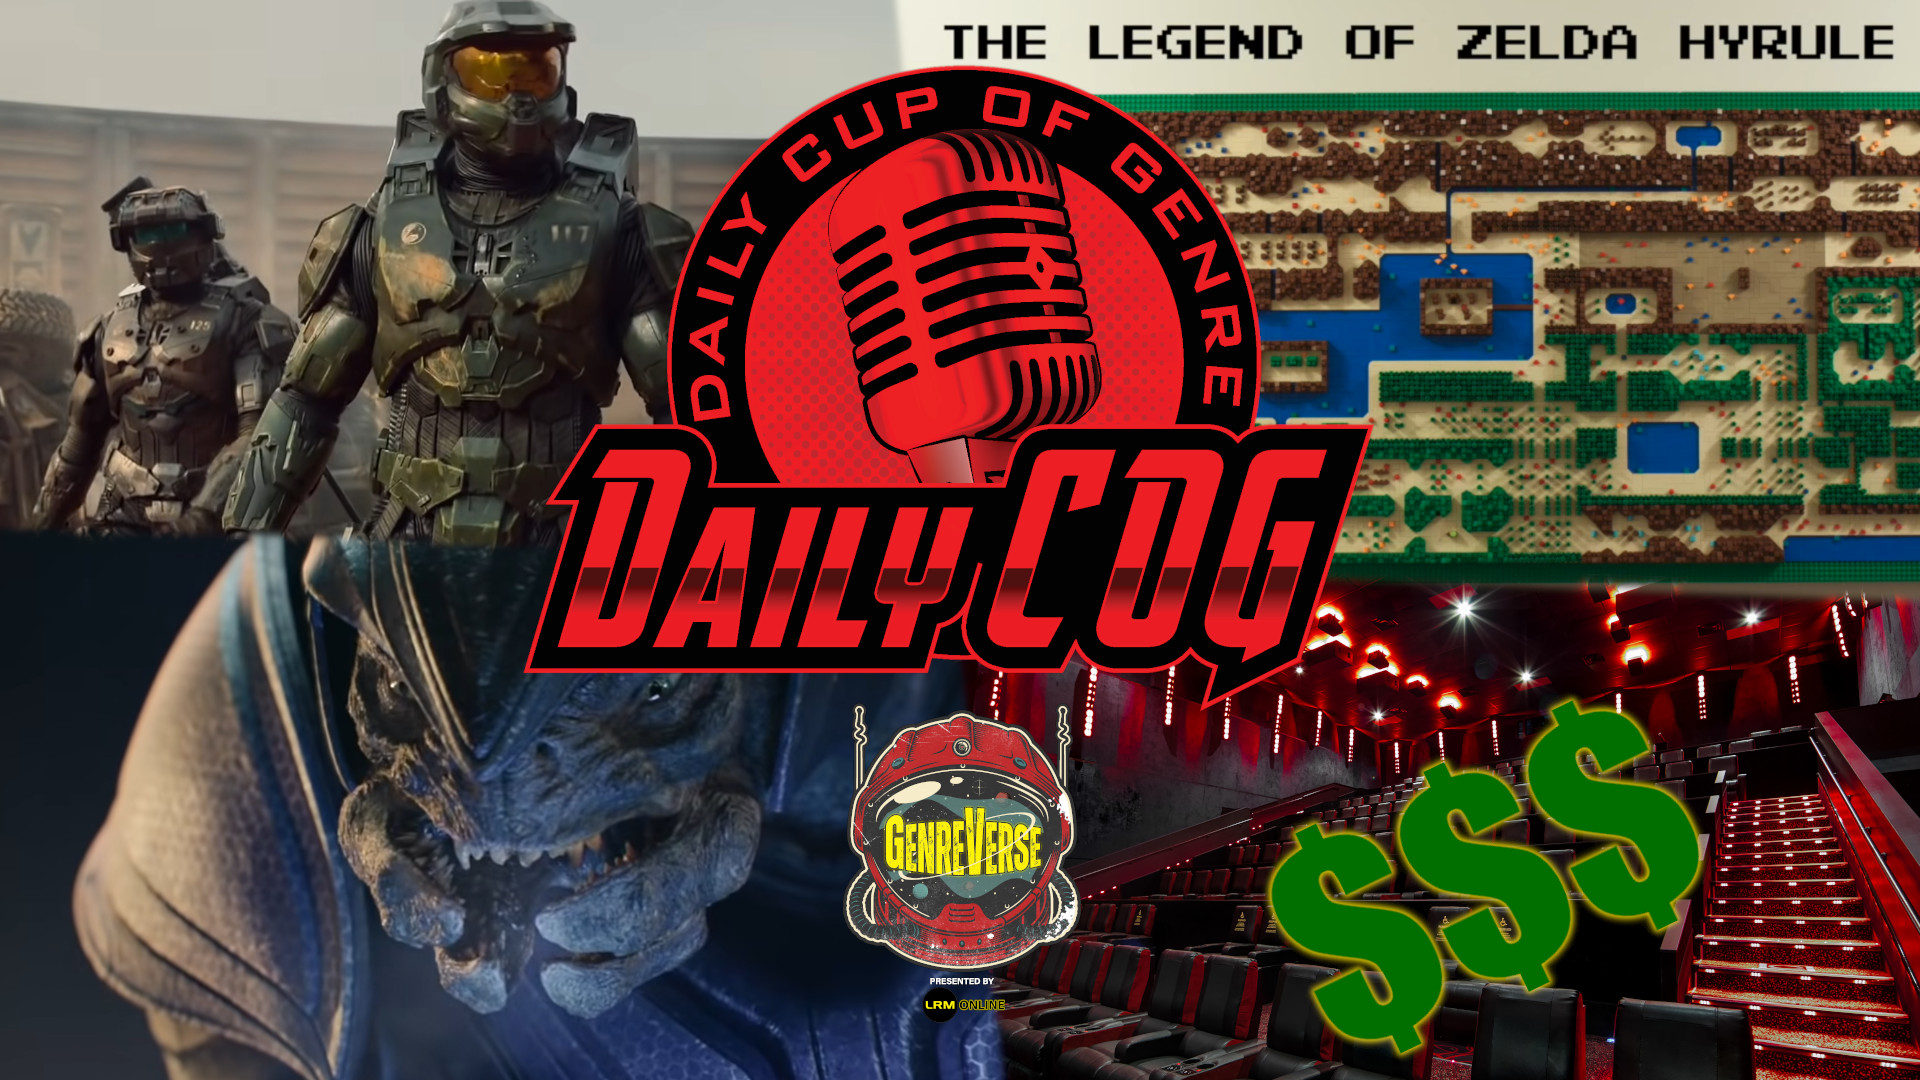 Weekend Box Office Numbers, Halo Trailer Reaction, And Cool Zelda MGT Crads And Lego Build Daily COG Video Mixdown